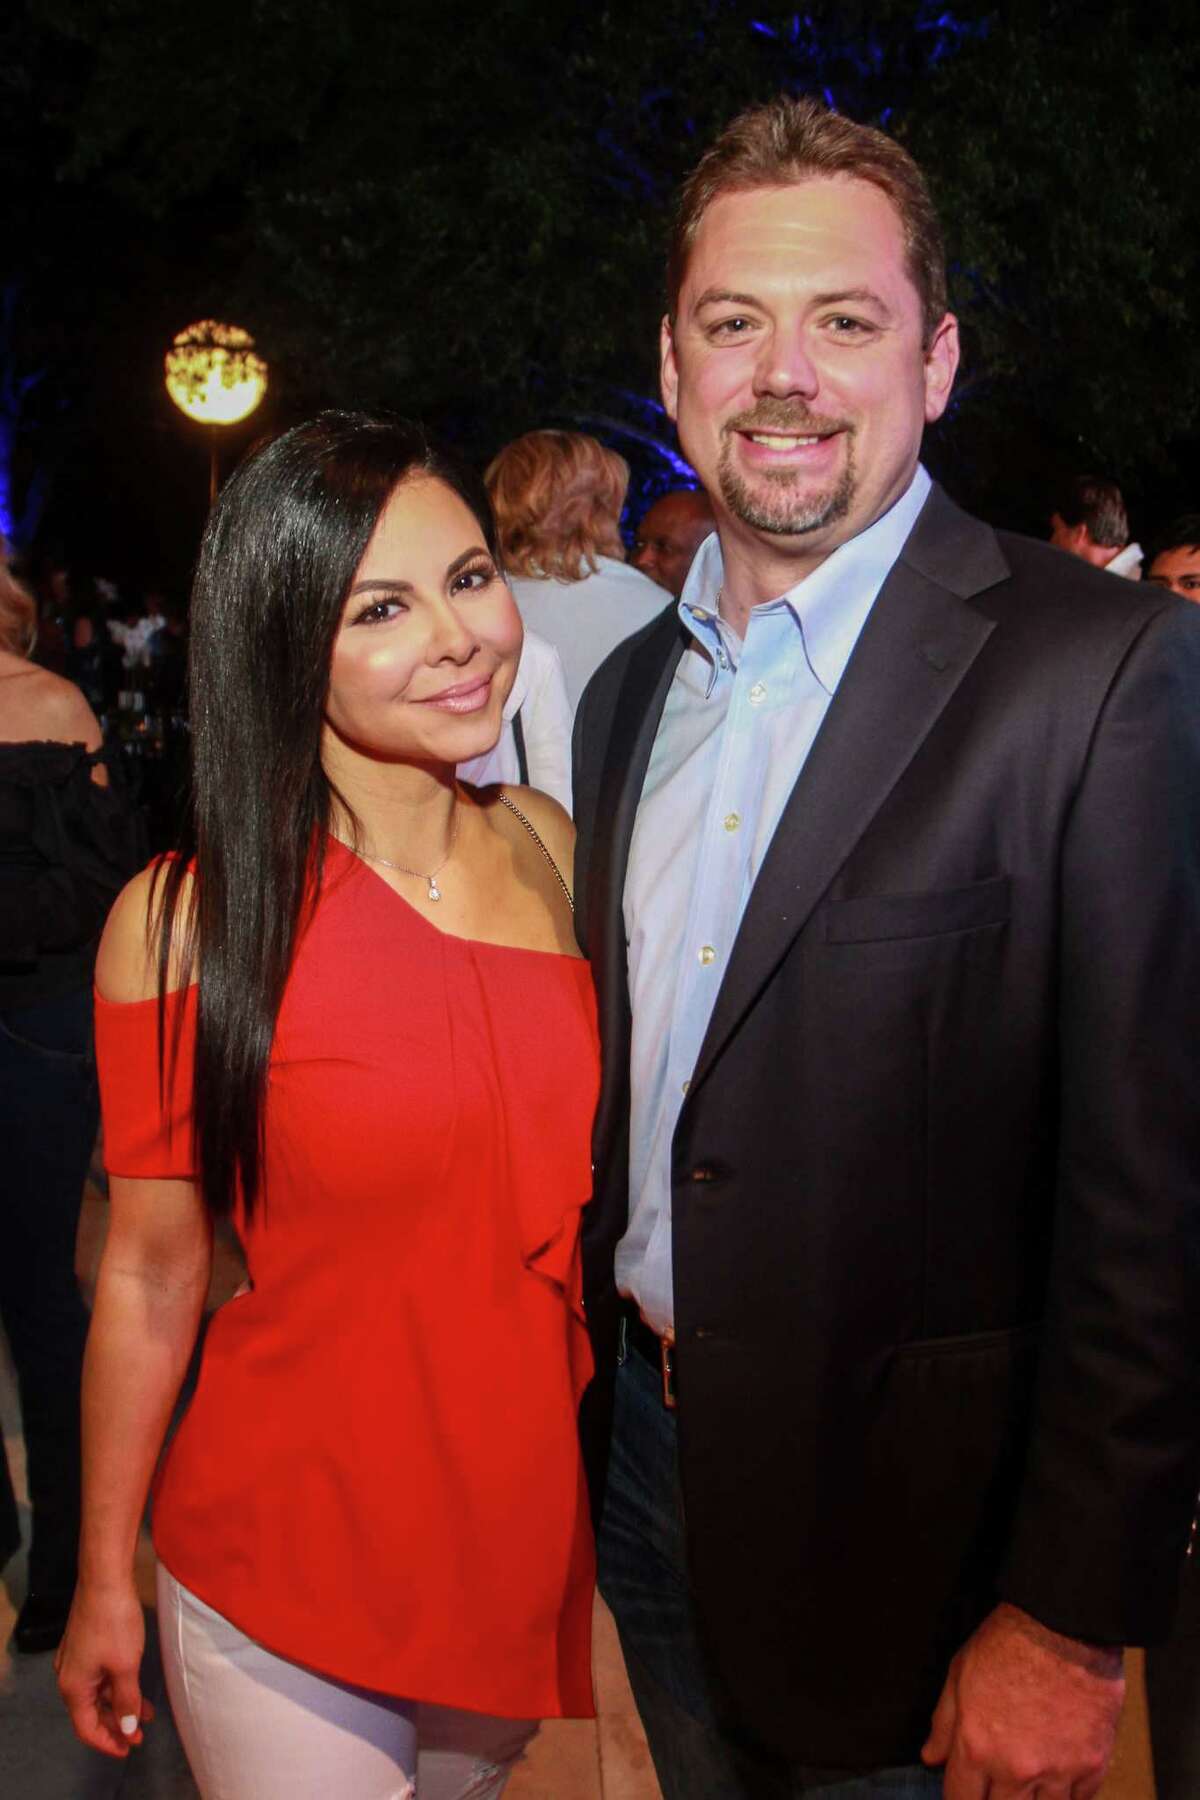 Jennifer Reyna and Mike Stewart at the True Blue Gala benefiting Houston Police Department.